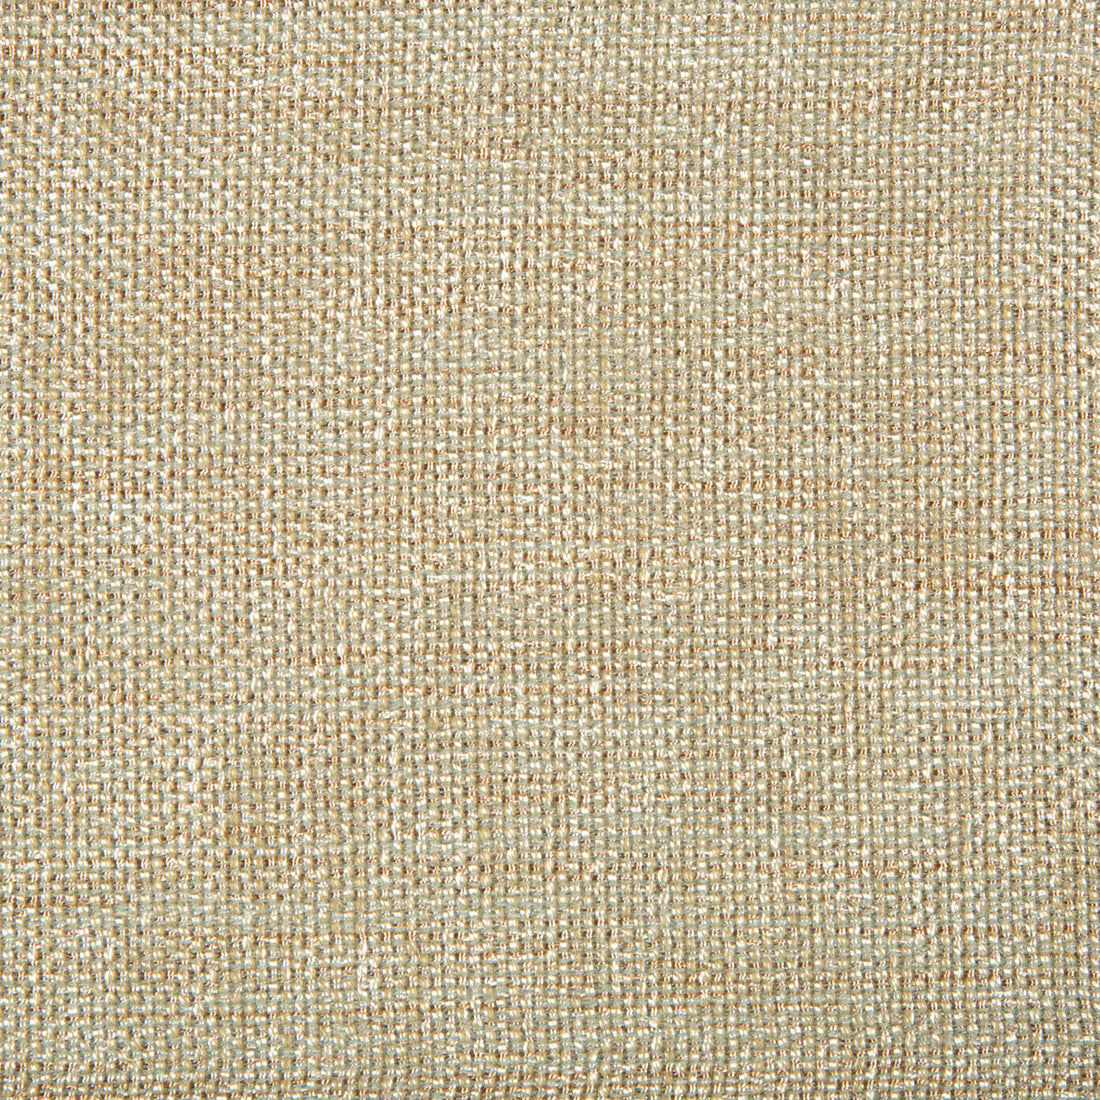 Kravet Contract fabric in 34926-415 color - pattern 34926.415.0 - by Kravet Contract